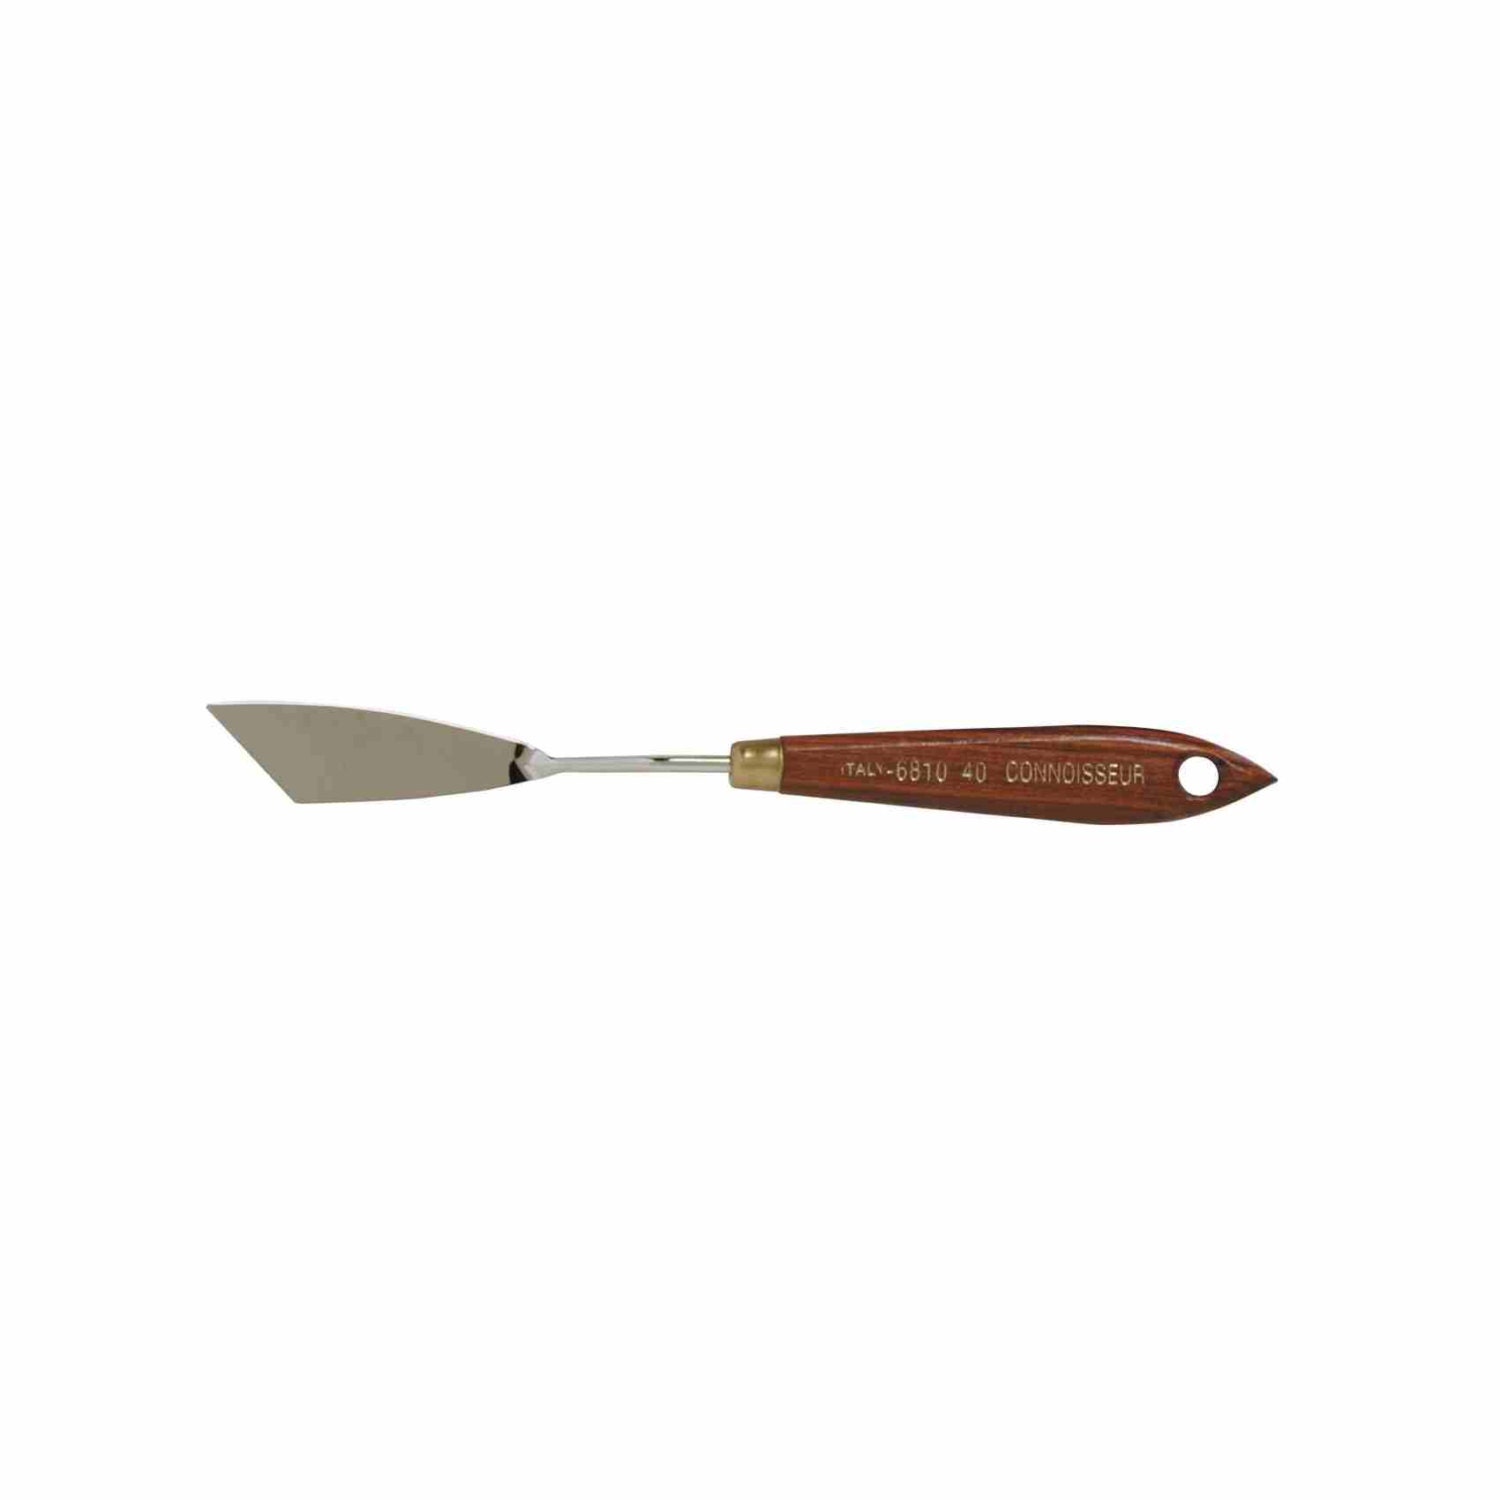 Connoisseur Italian Painting Knife, Palette Knive 68. Painting